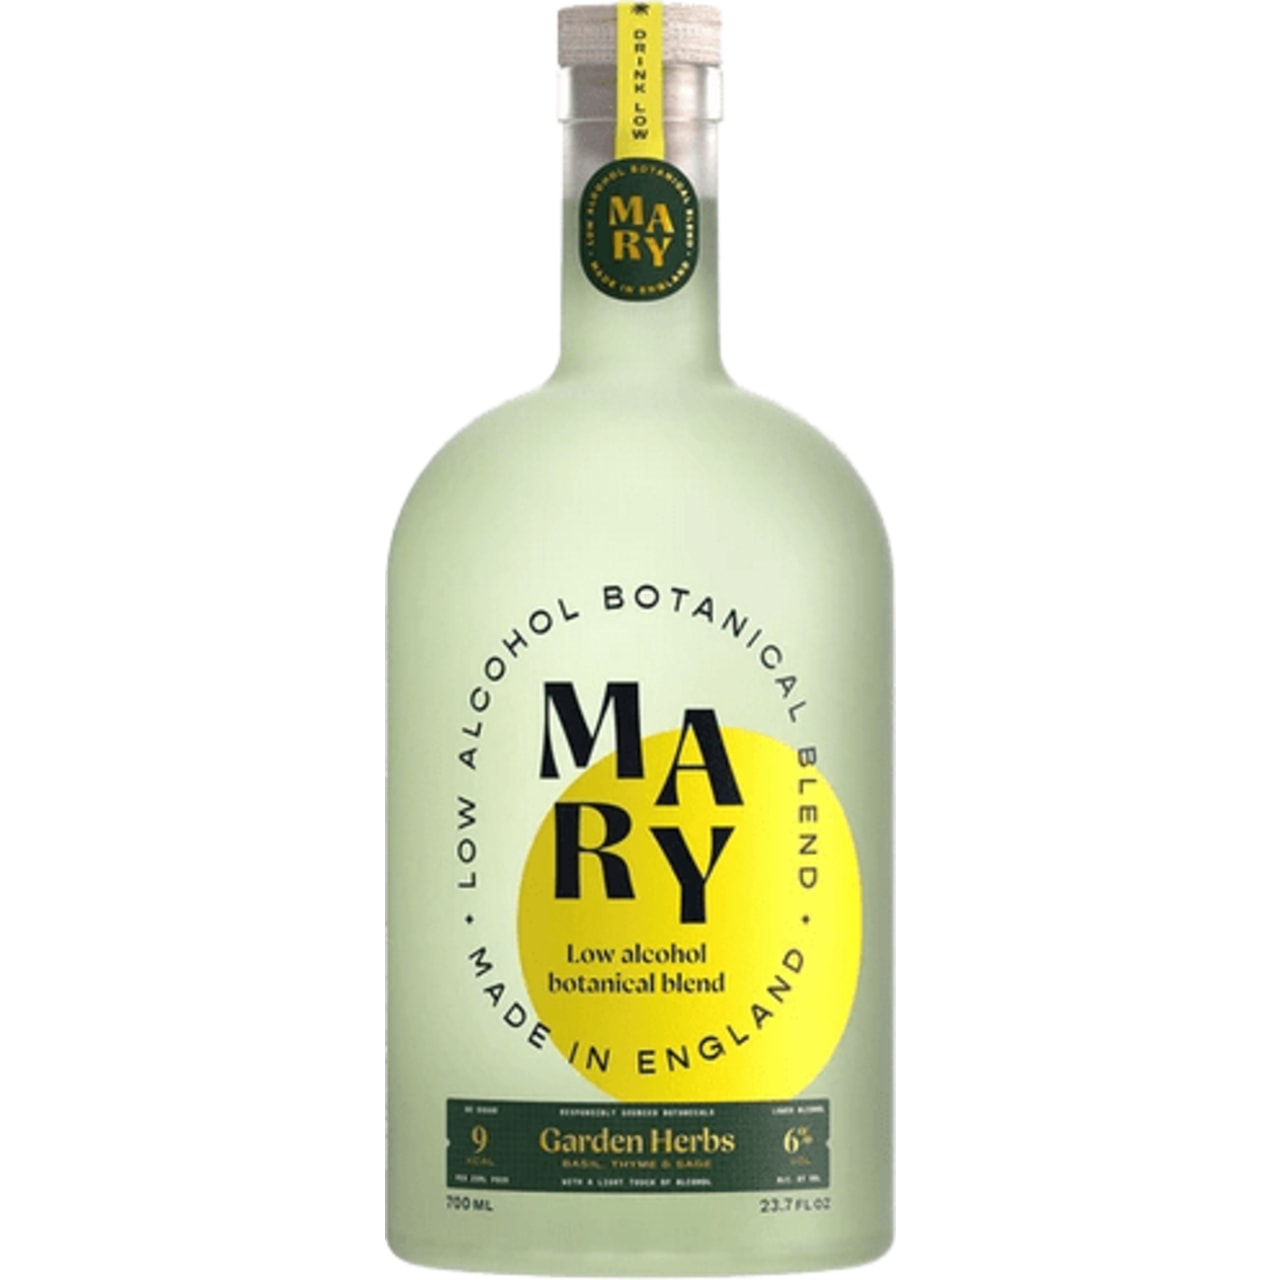 Mary Low Alcohol Botanical Blend